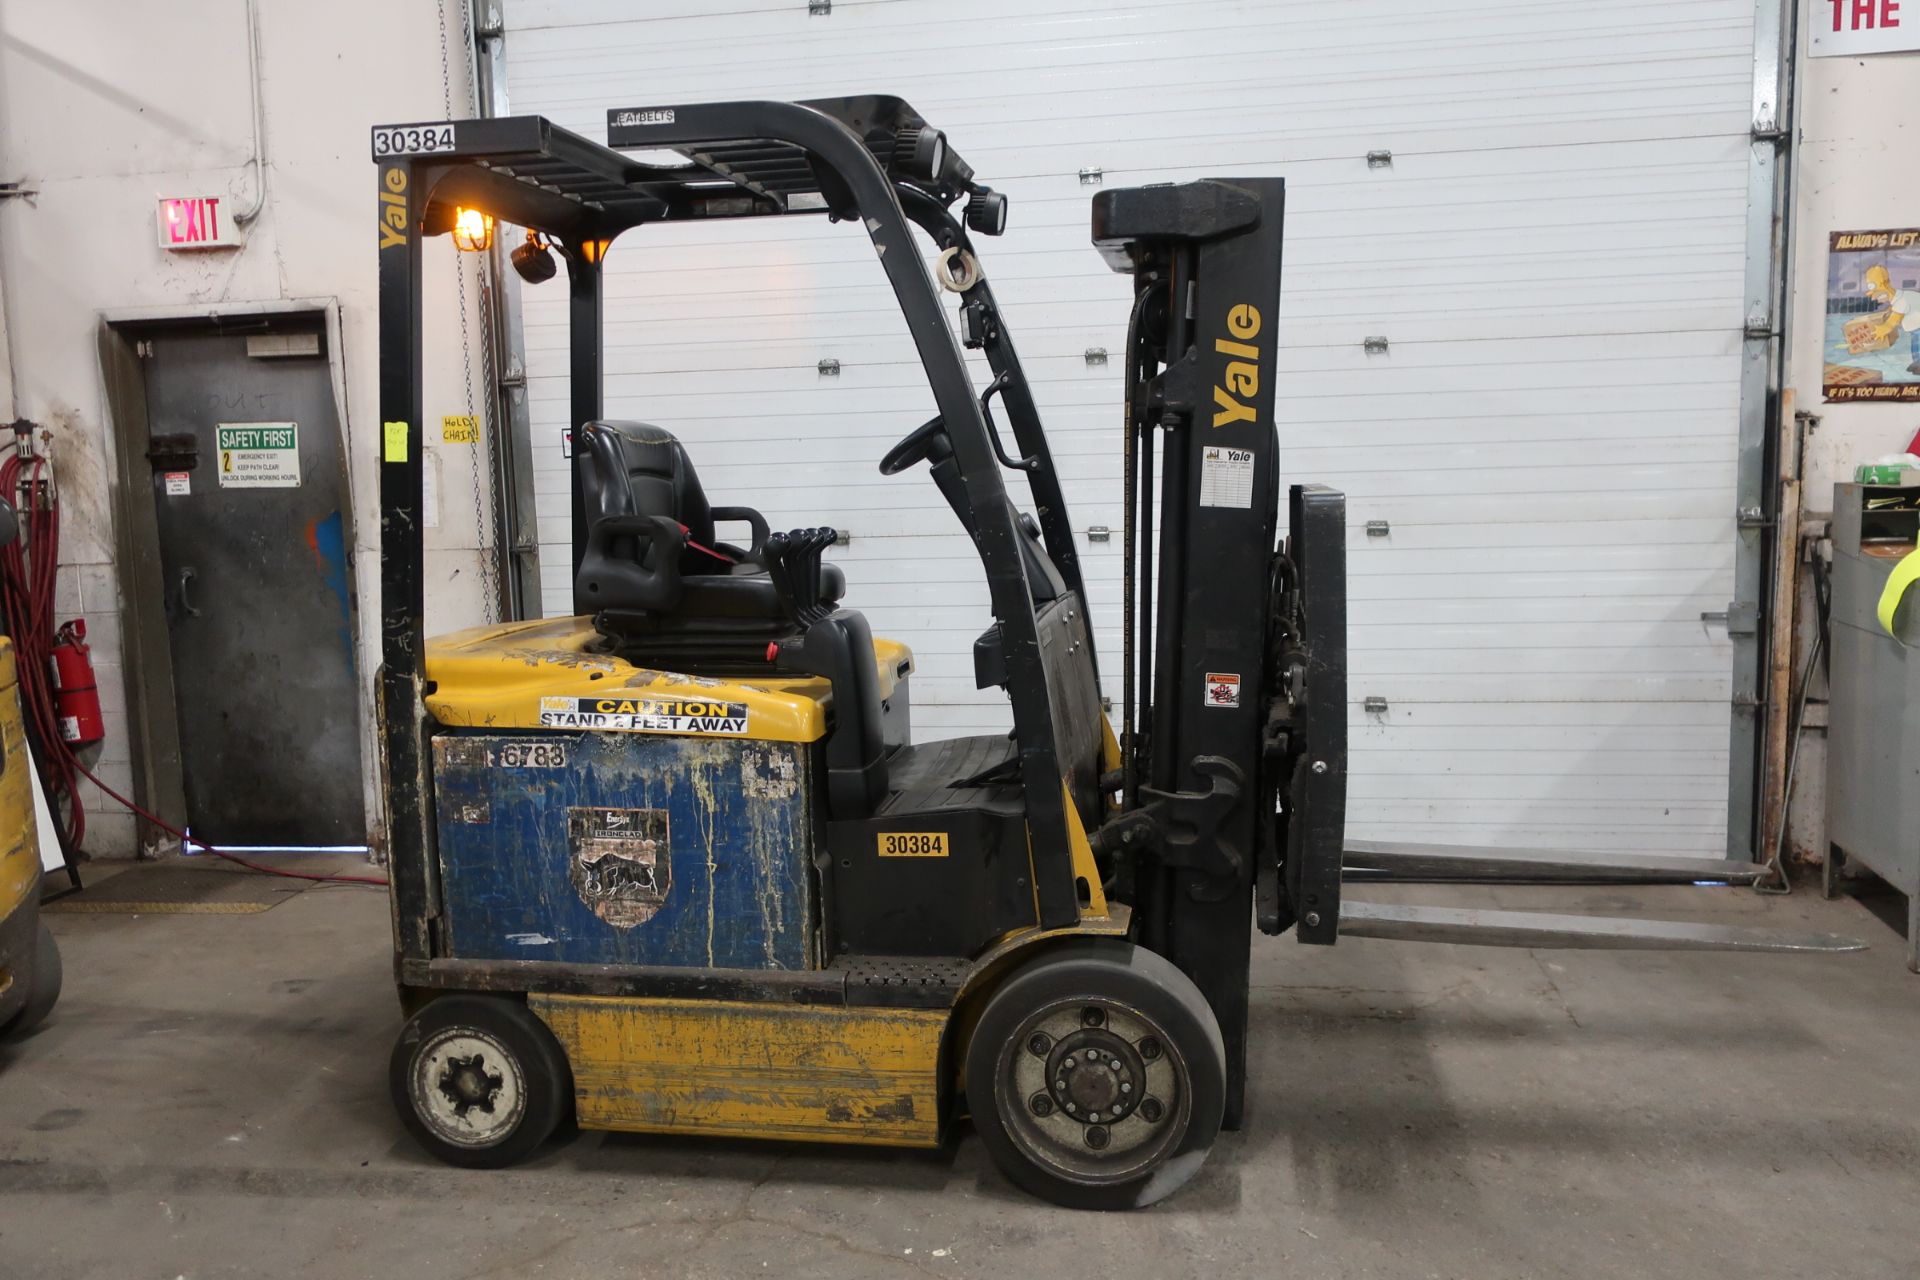 FREE CUSTOMS - 2014 Yale 5000lbs Capacity Forklift with 3-stage mast - electric with charger with